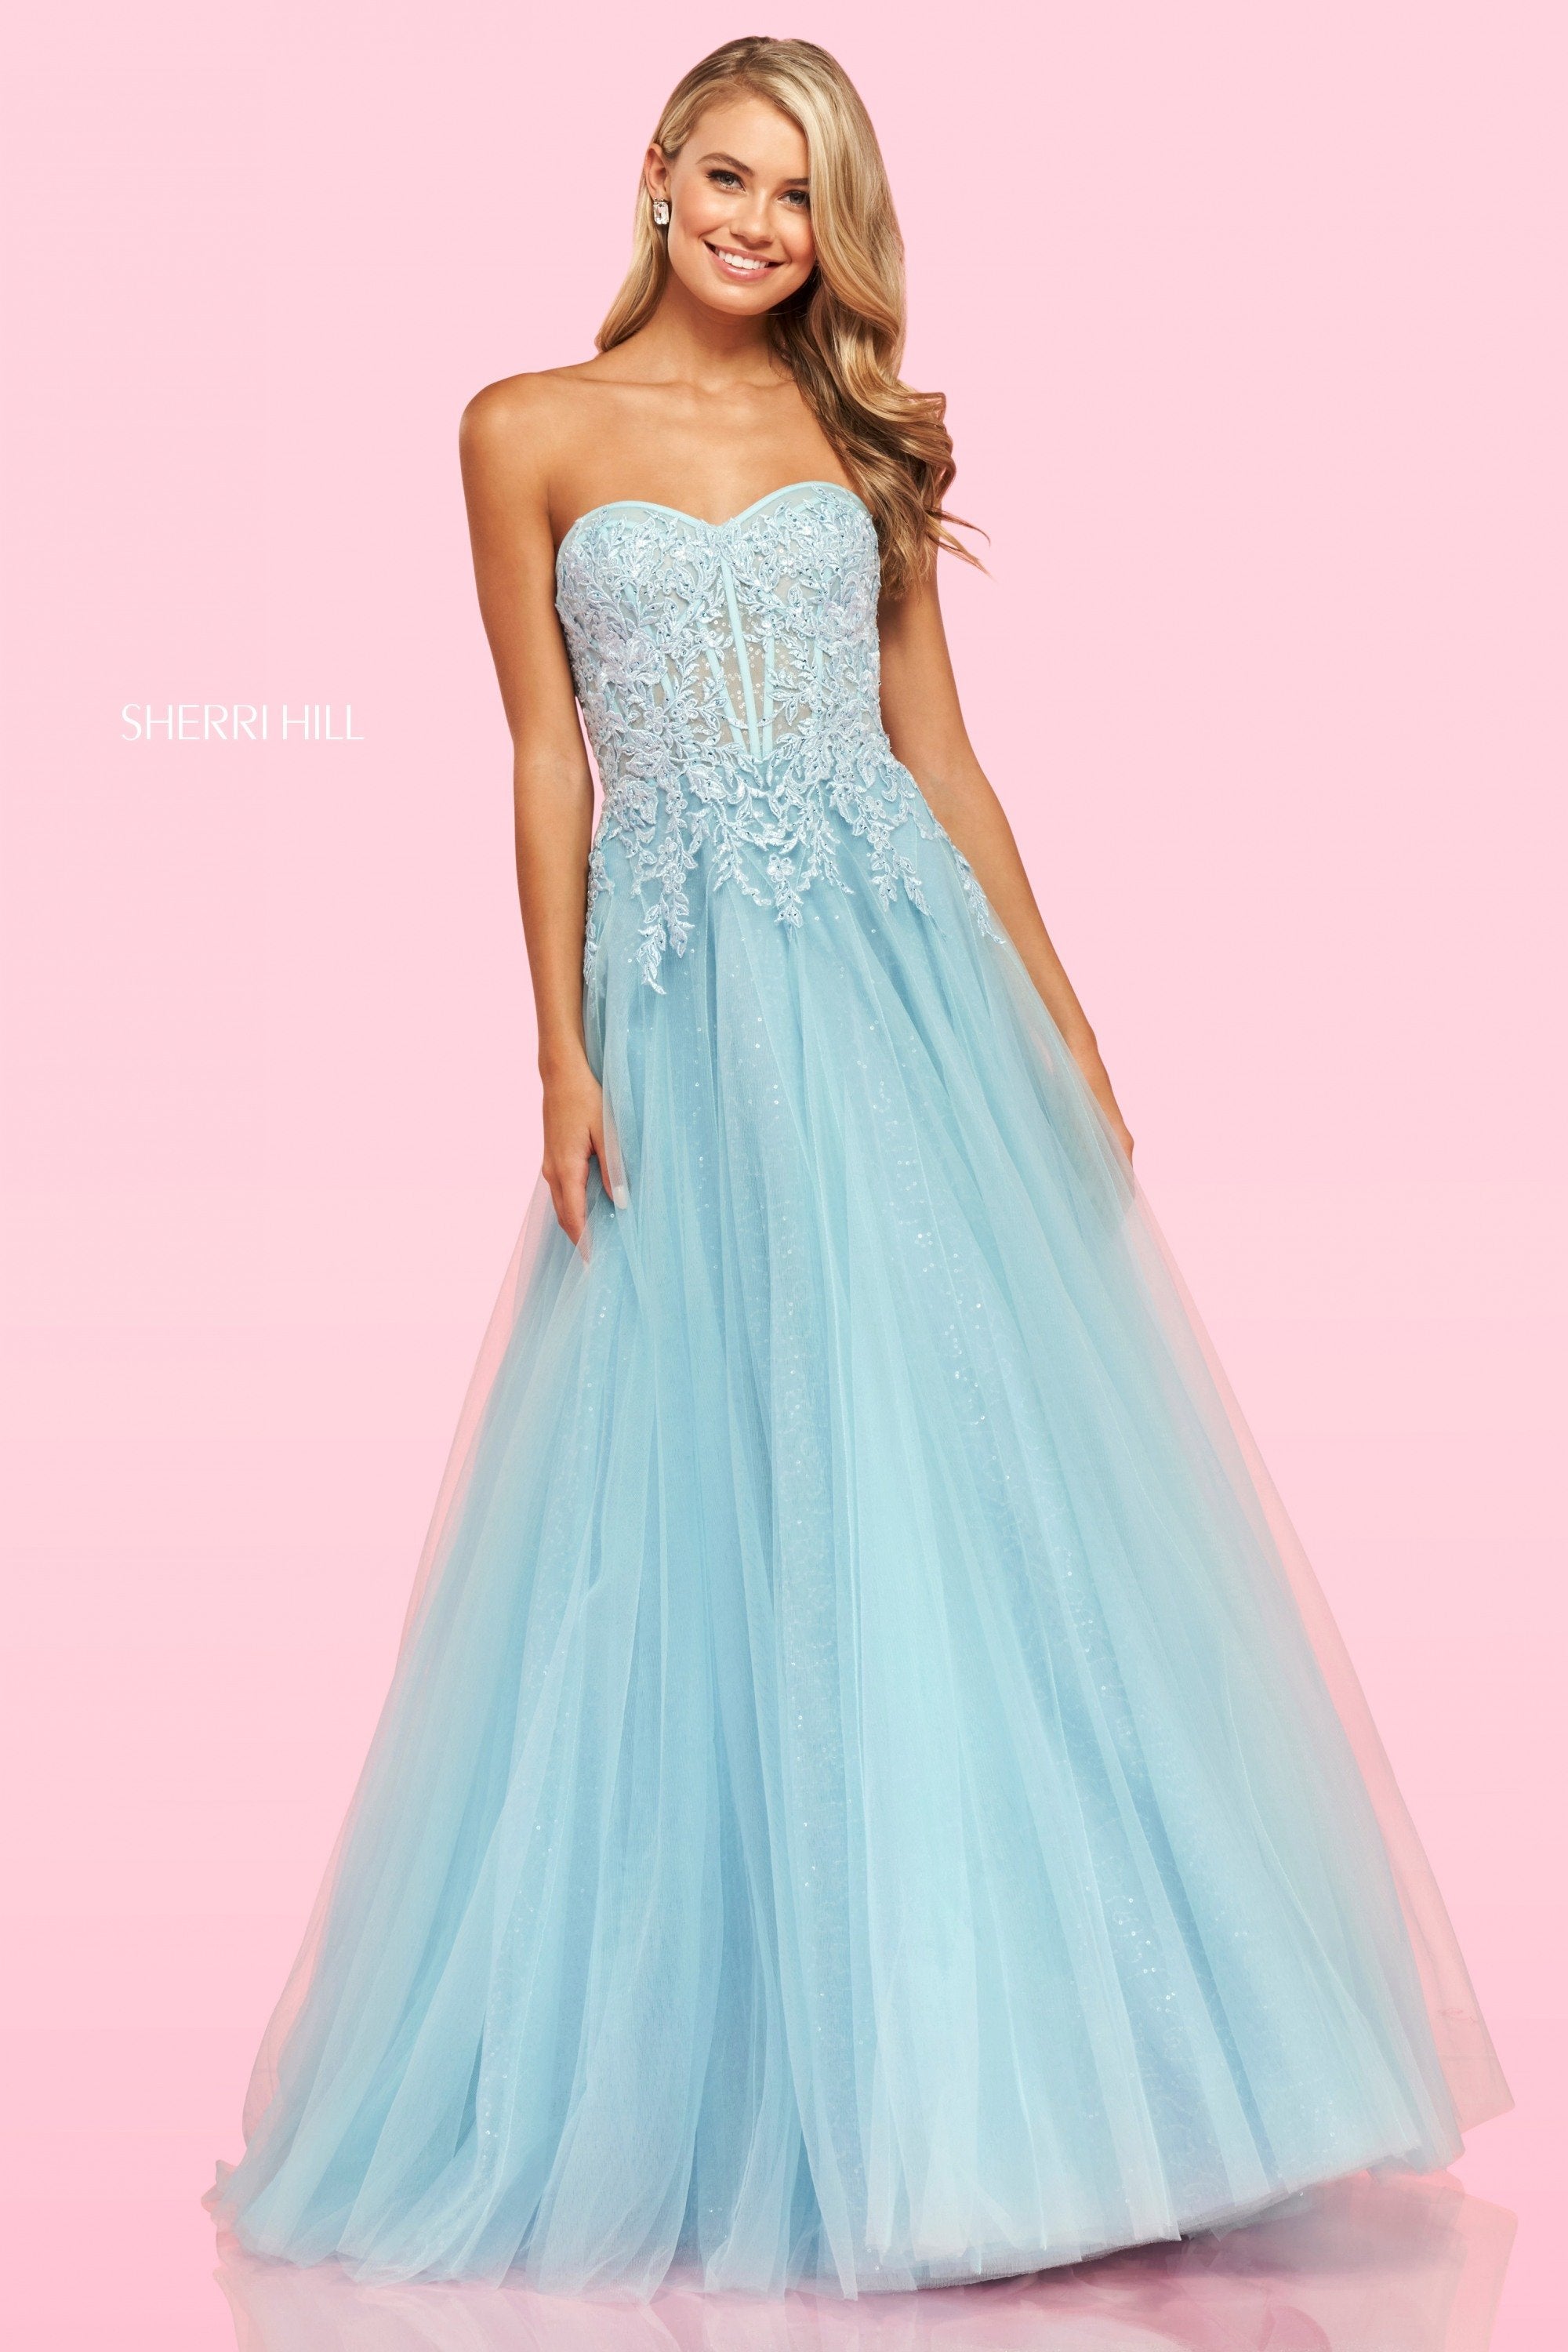 Sherri Hill 54155 dress images in these colors: Light Blue, Royal, Red, Black, Bright Pink, Navy.